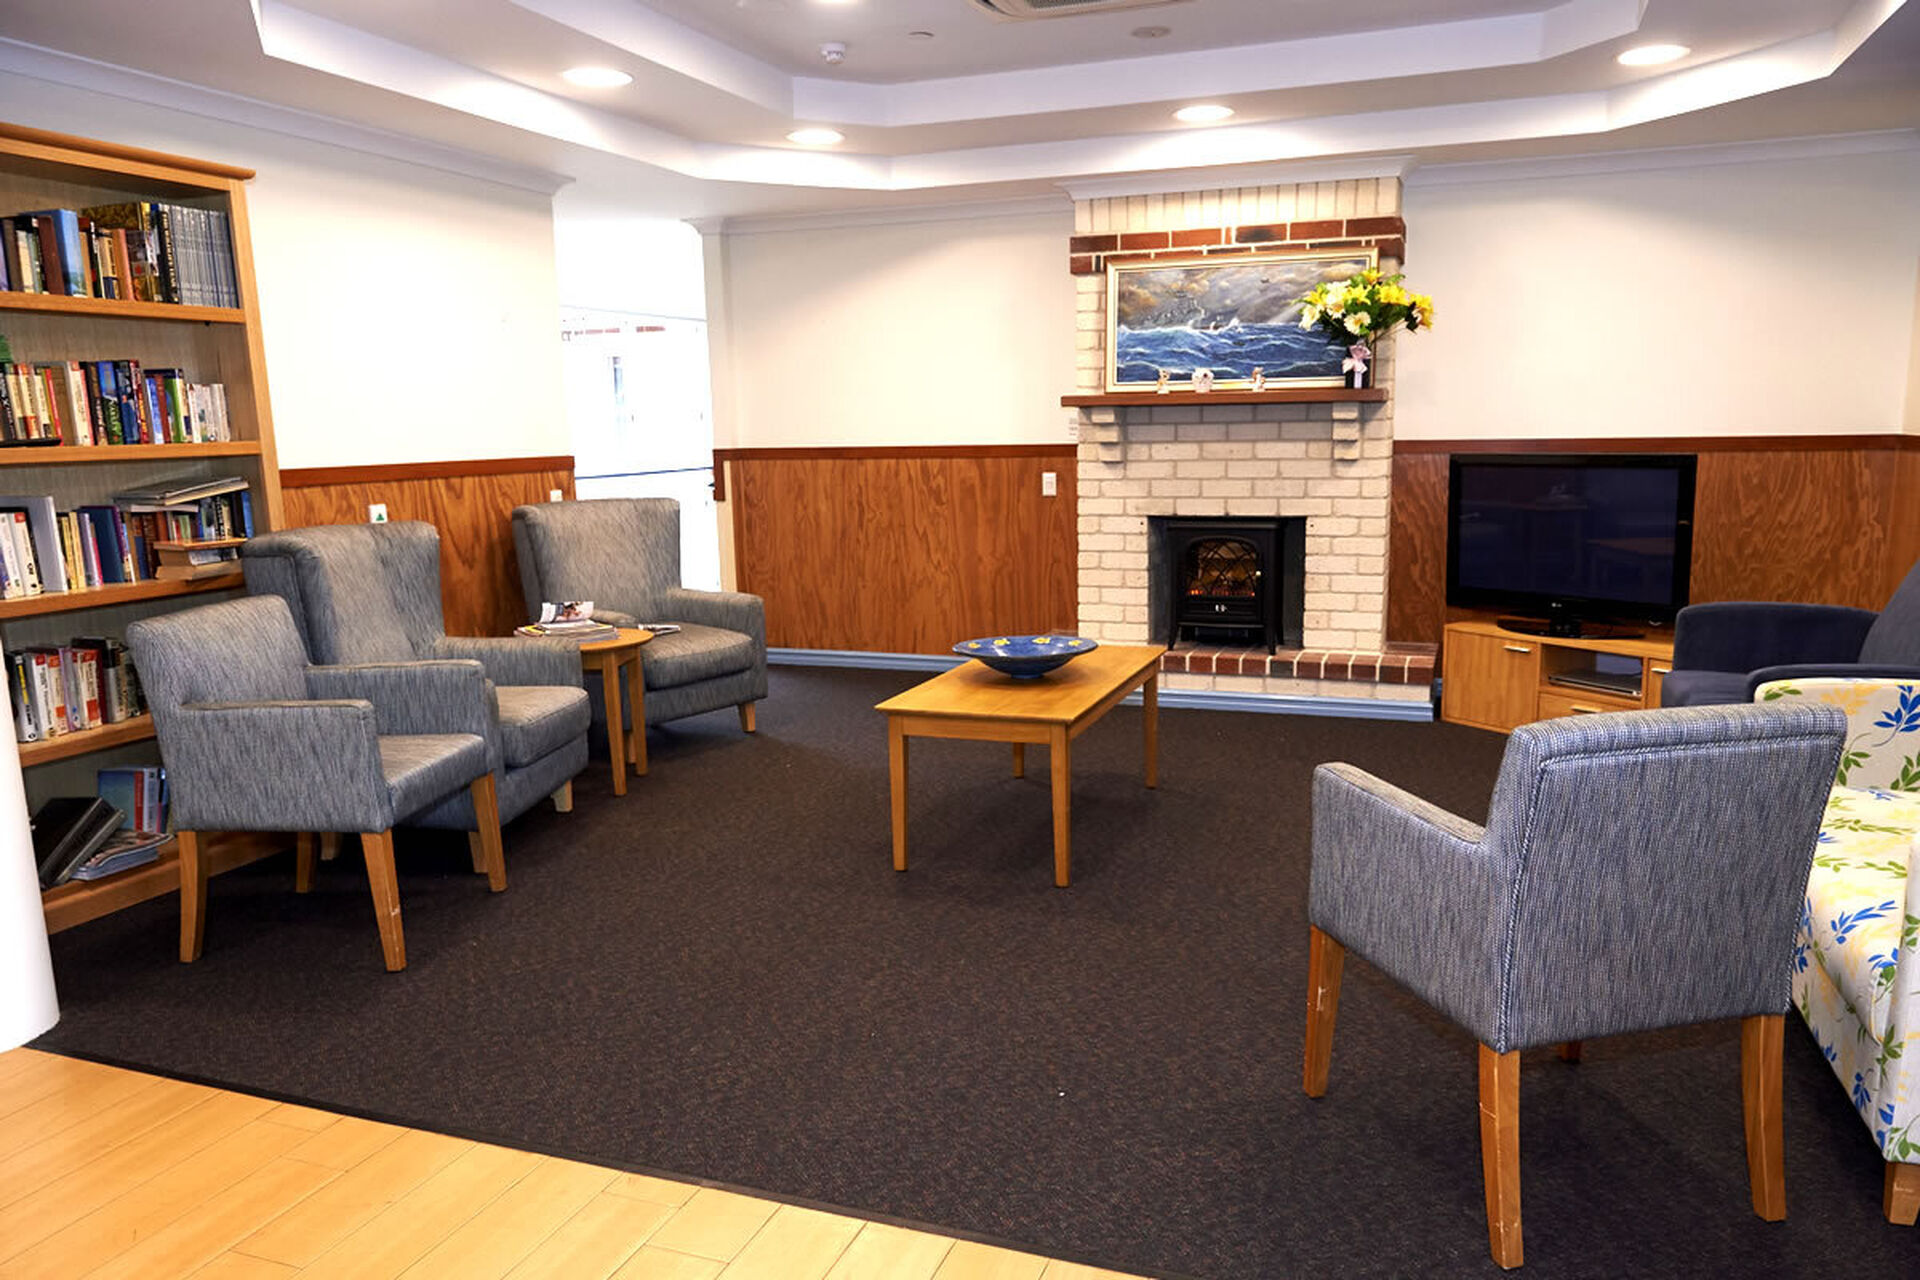 spacious sitting area for nursing home residents at baptistcare bethel aged care home in albany wa